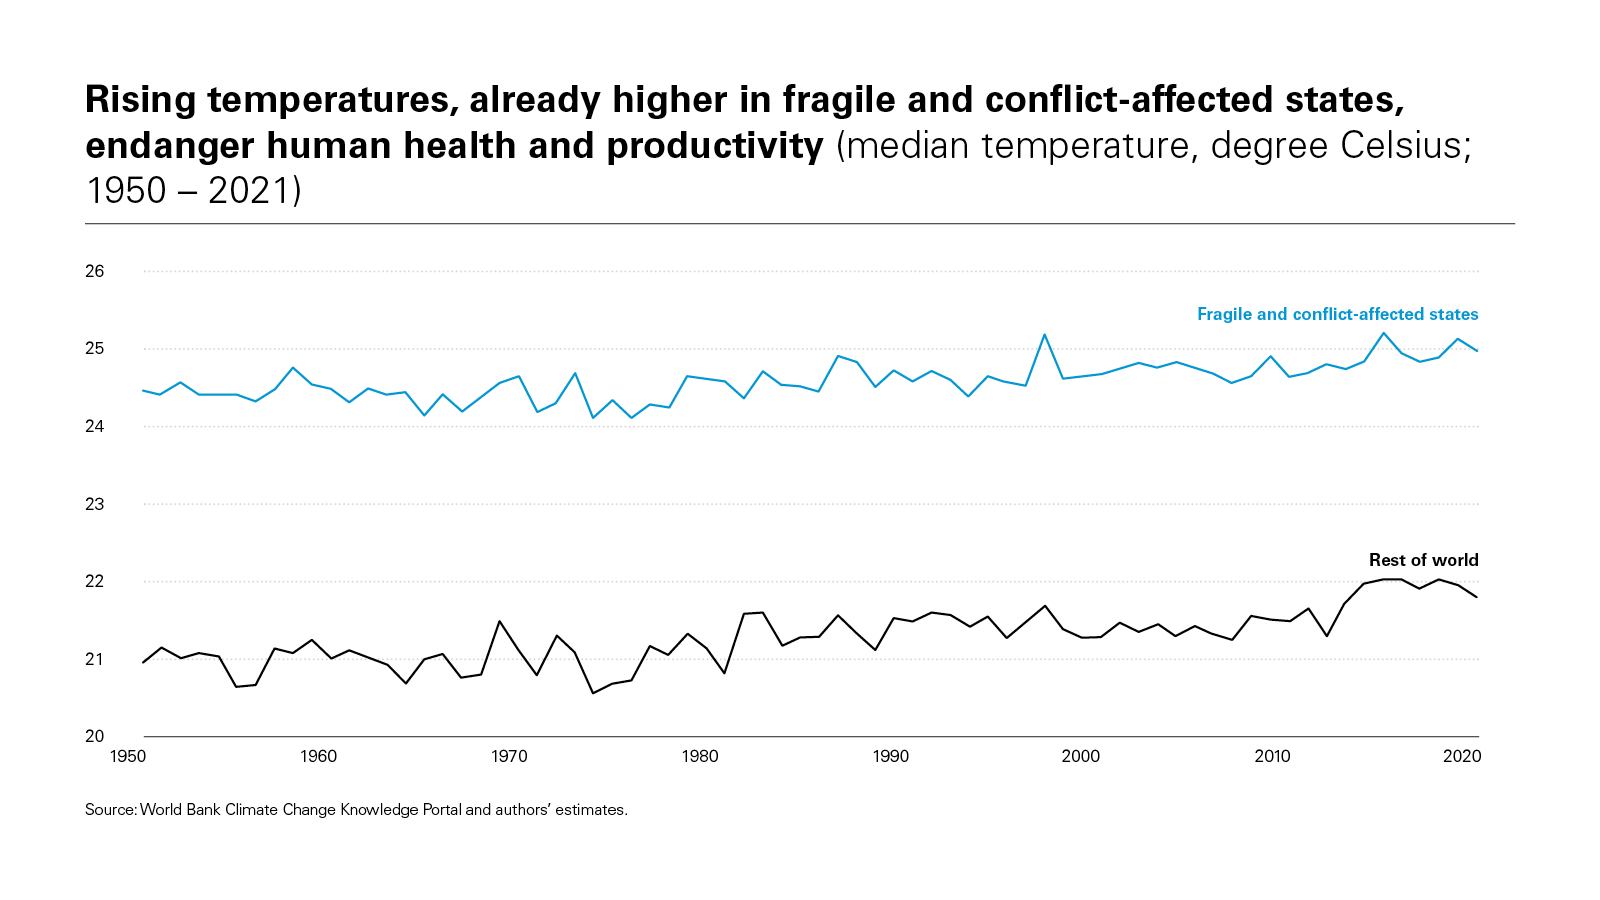 Rising temperatures, already higher in fragile and conflict-affected states, endanger human health and productivity